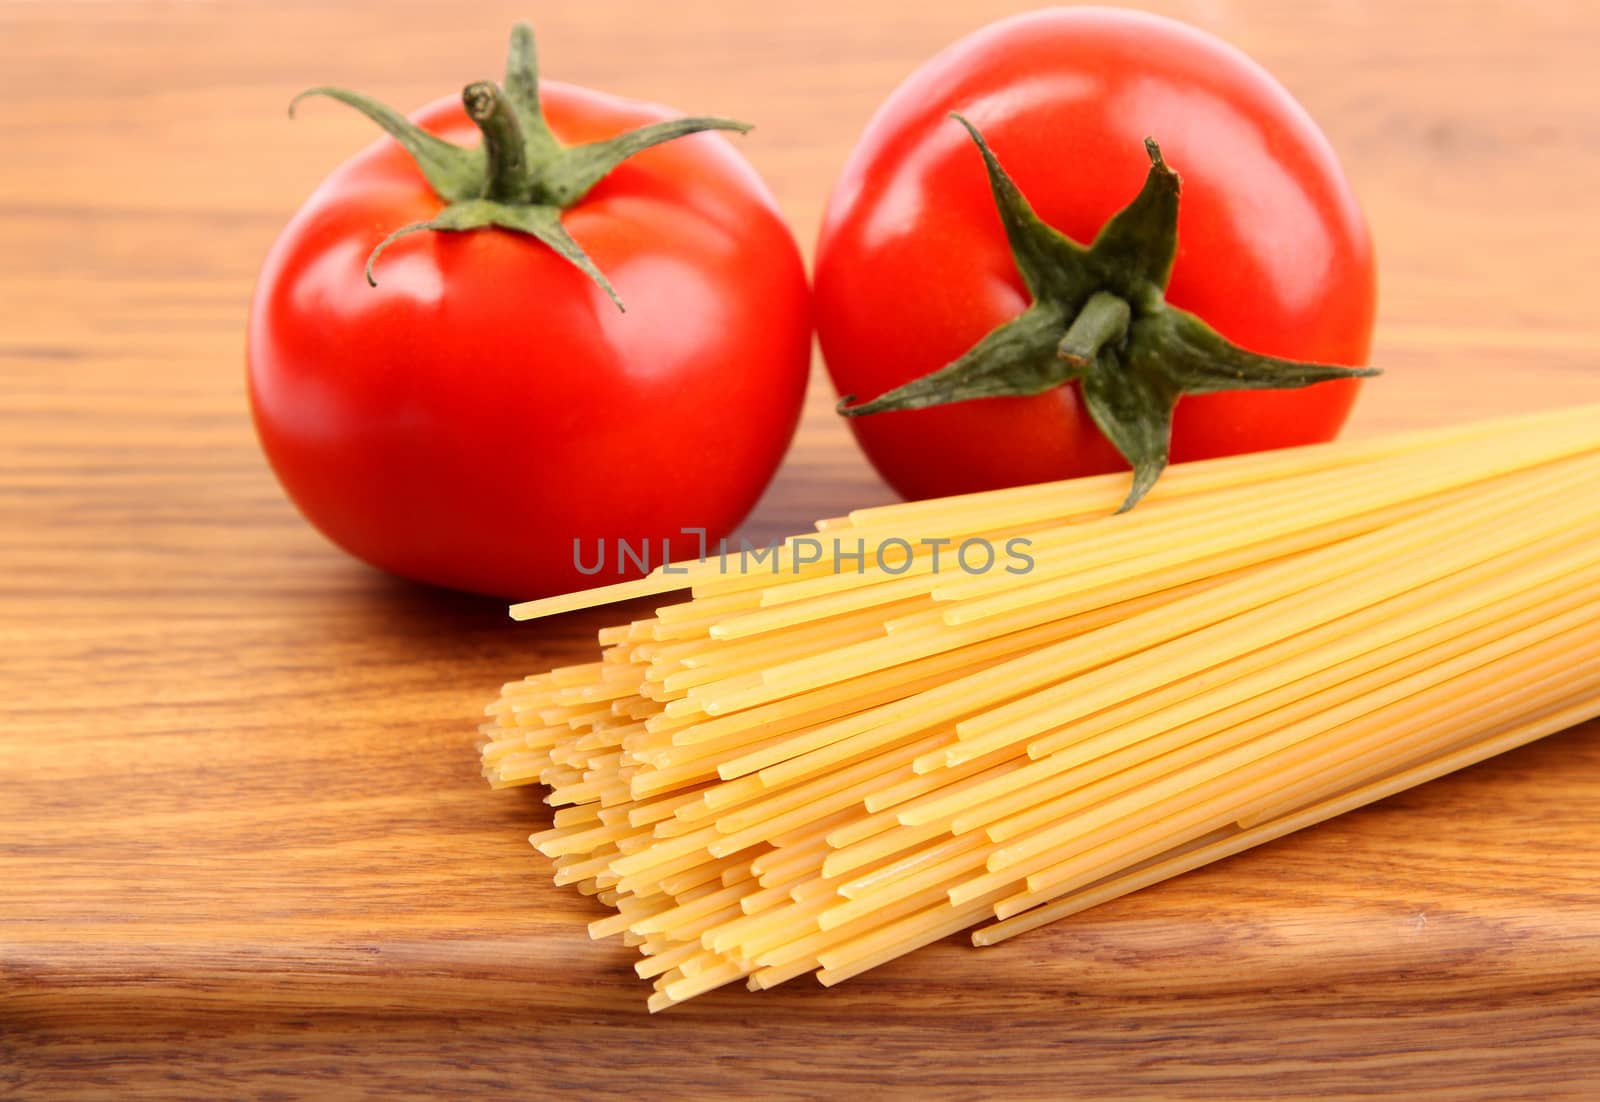 Tomatoesl and uncooked spaghetti by indigolotos